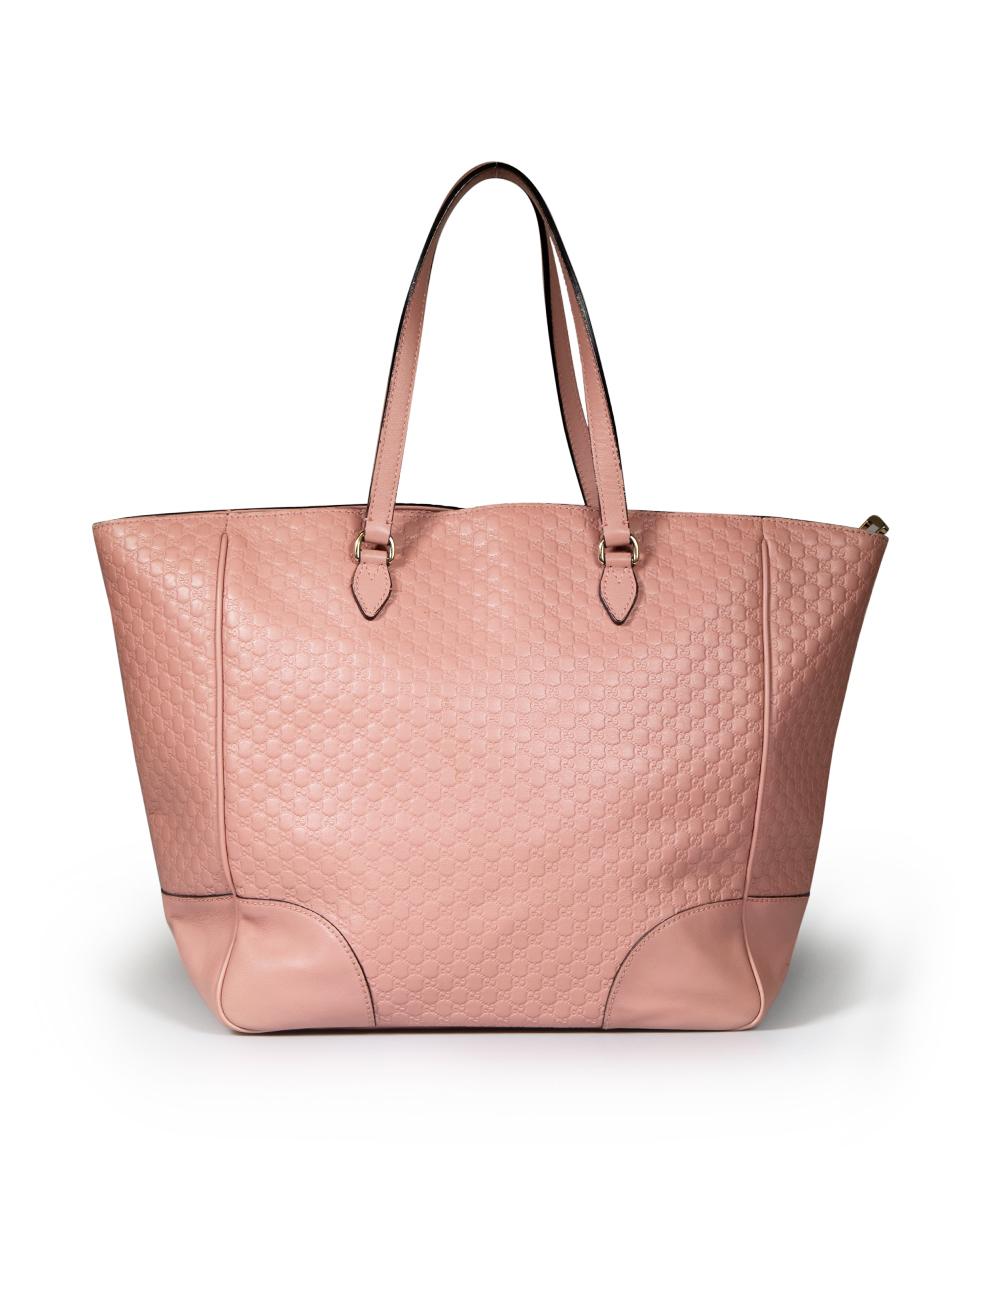 Gucci Pink Leather Microguccissima Medium Bree Tote In Good Condition For Sale In London, GB